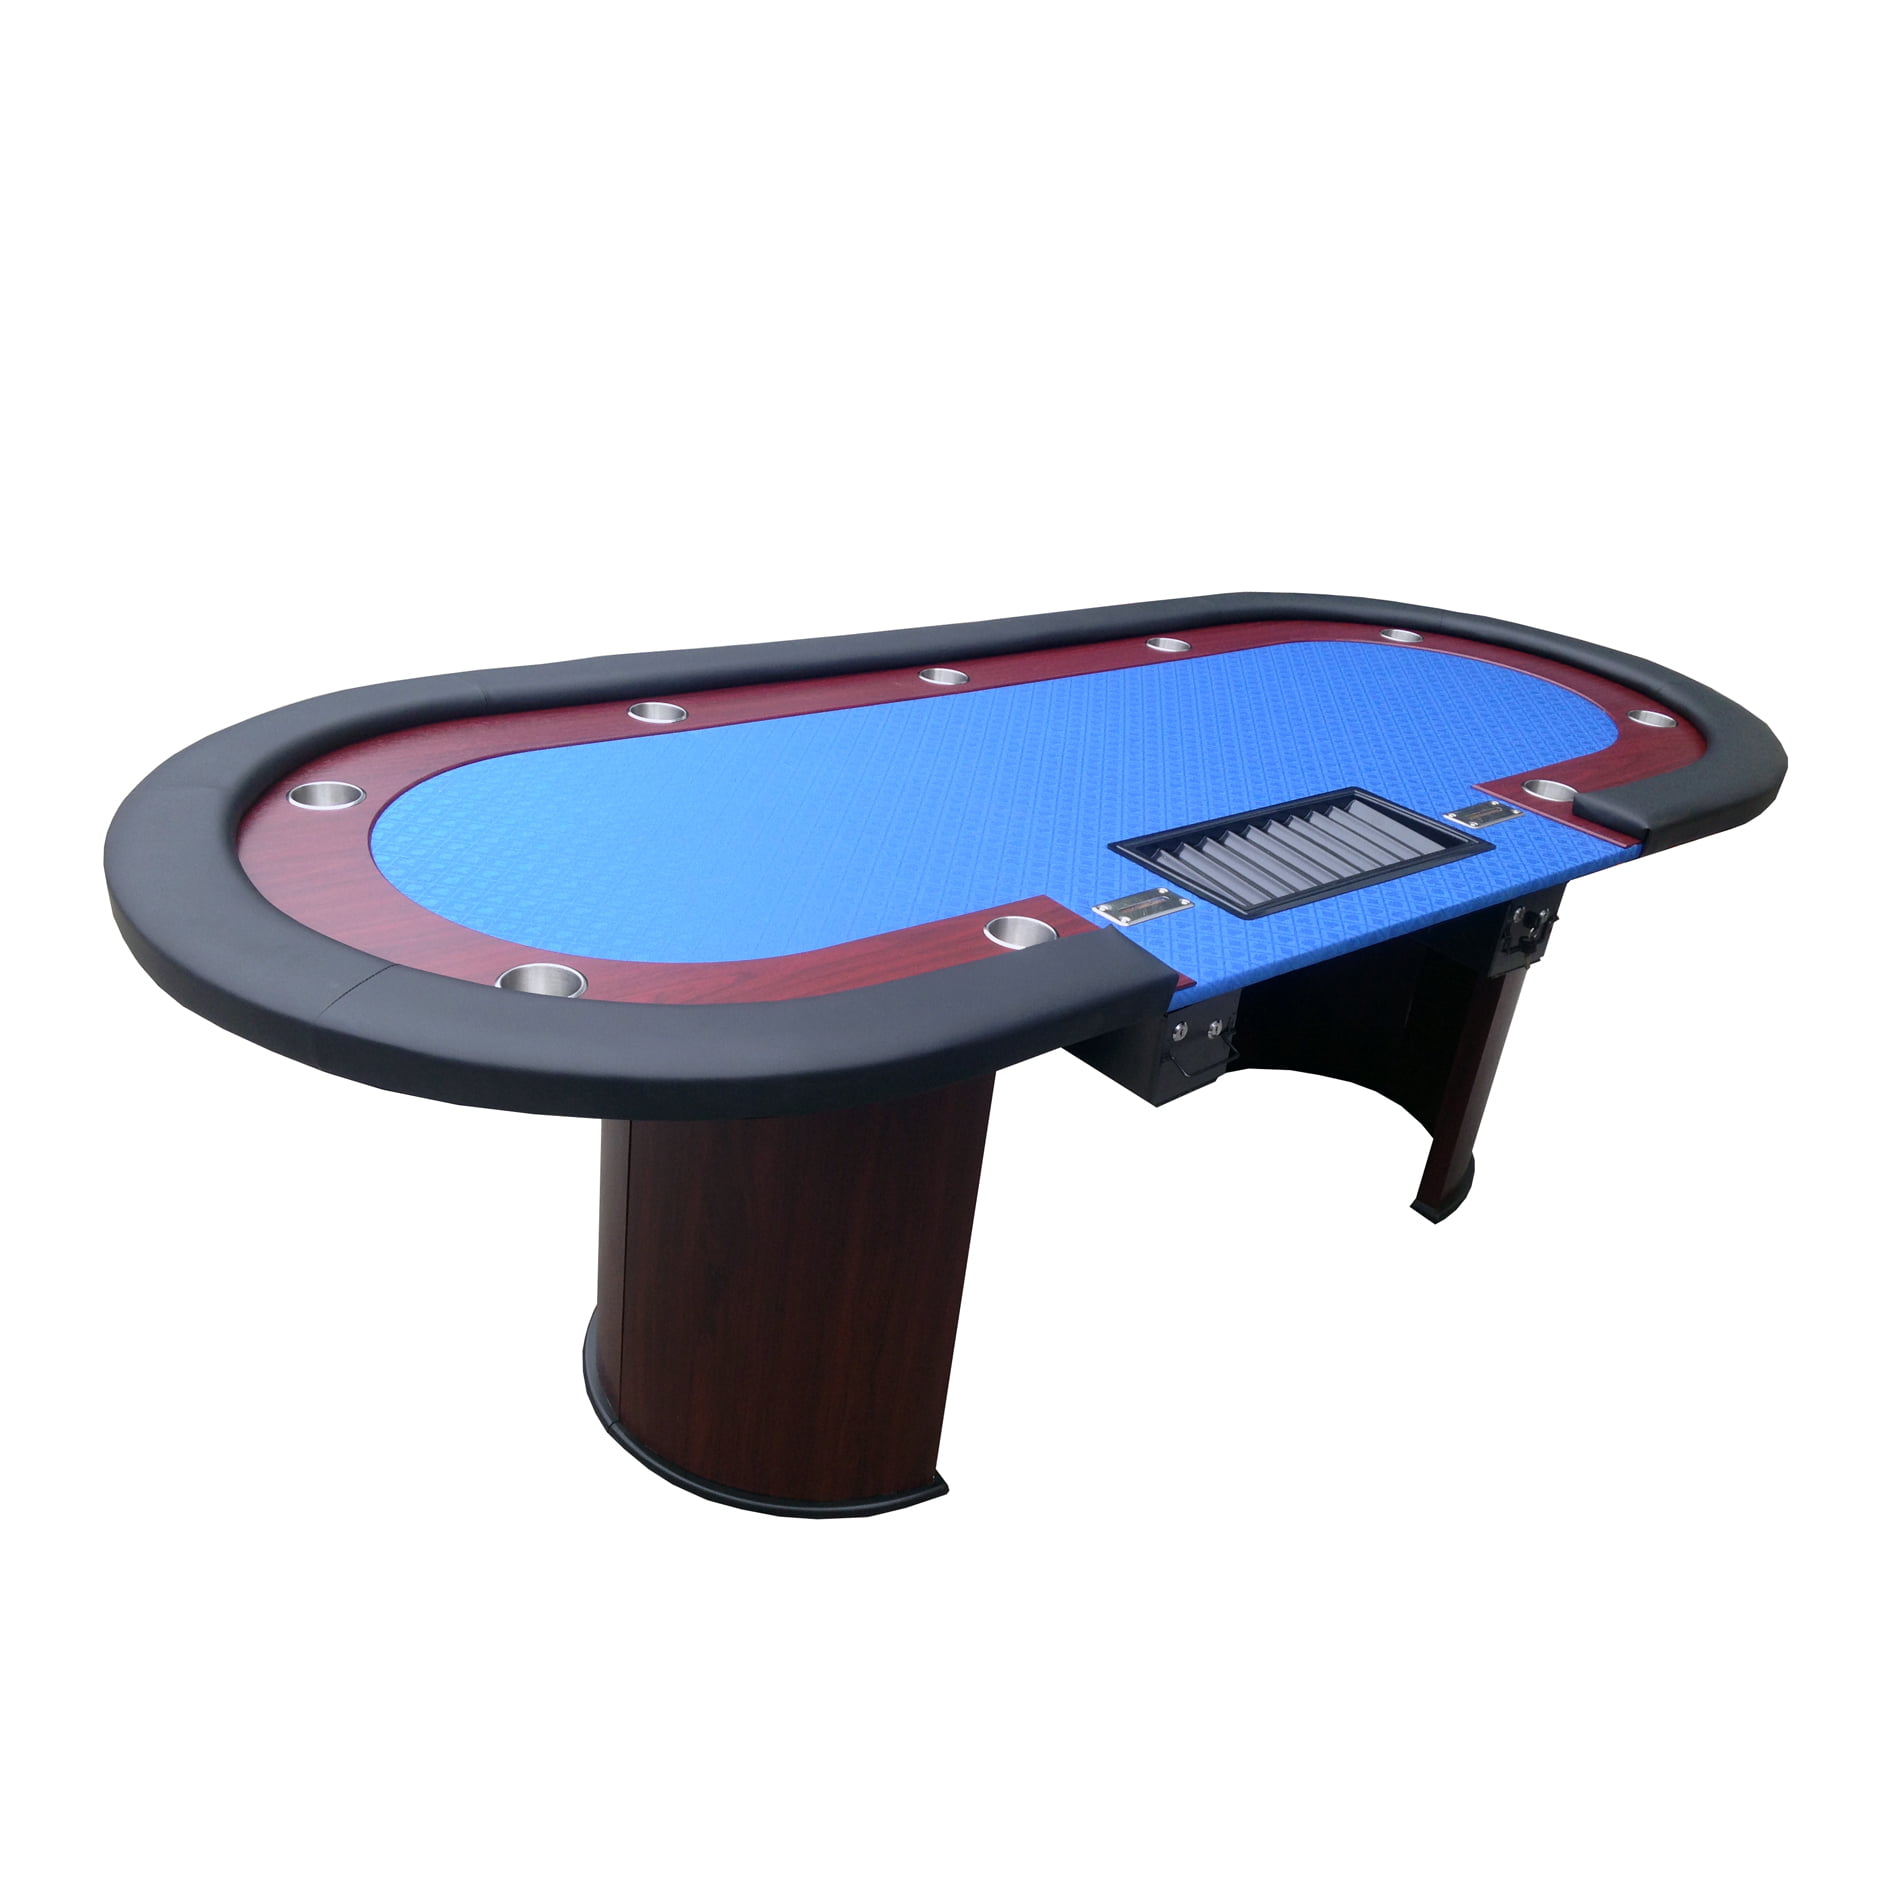 IDS 96 Poker Table for Detachable Armrest Chip Tray Jumbo Cup Holders Speed Cloth Stainless Pedestal Base 